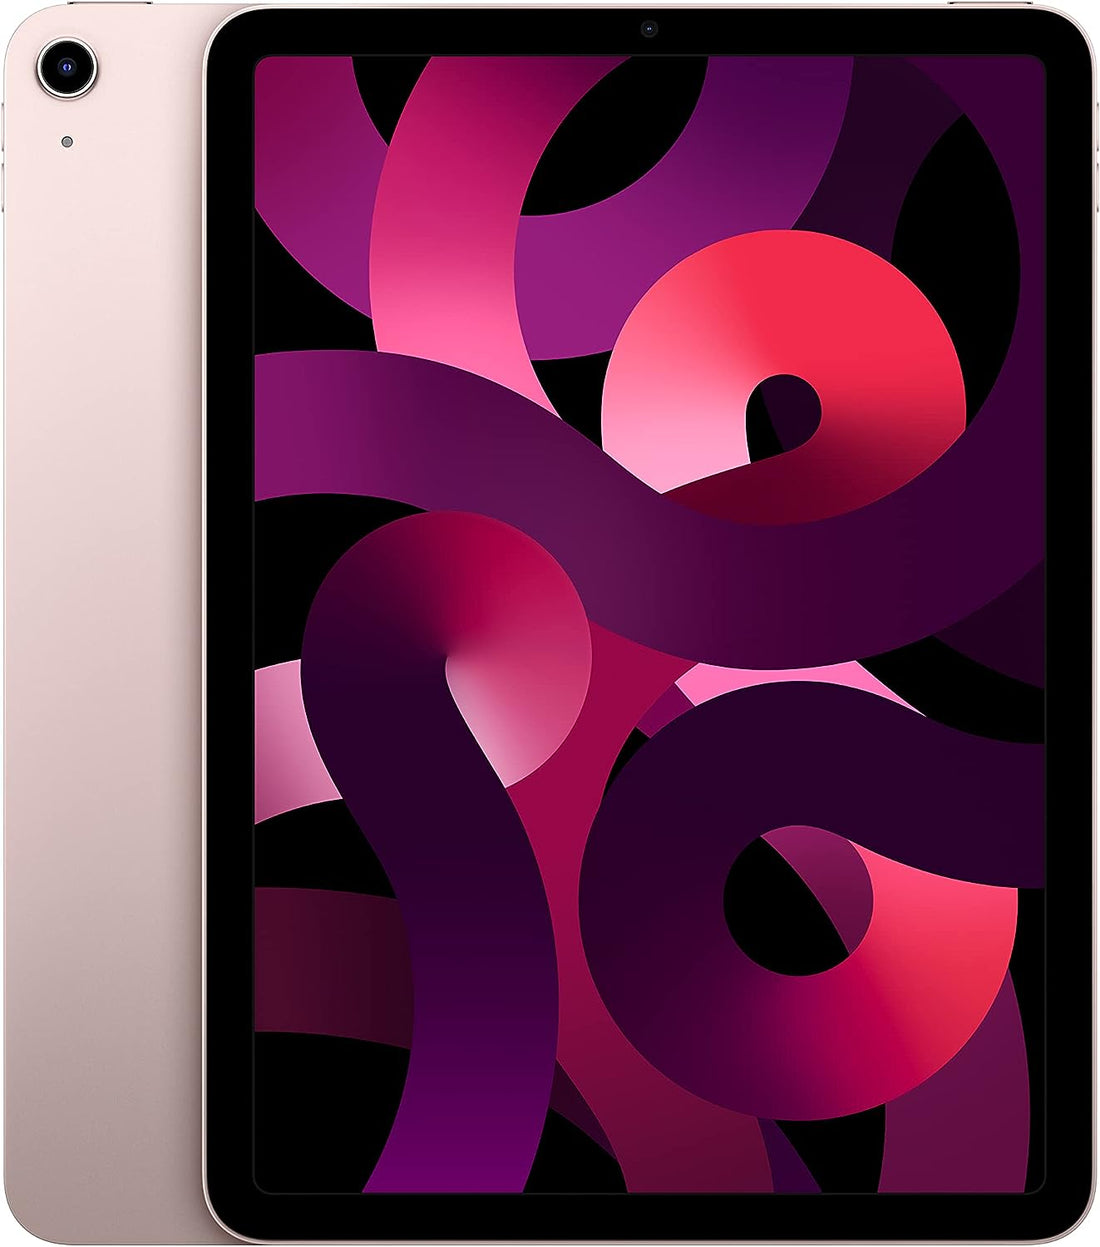 Apple iPad Air 5th Gen (2022) 10.9-inch, 256GB, WIFI Only - Pink (Certified Refurbished)